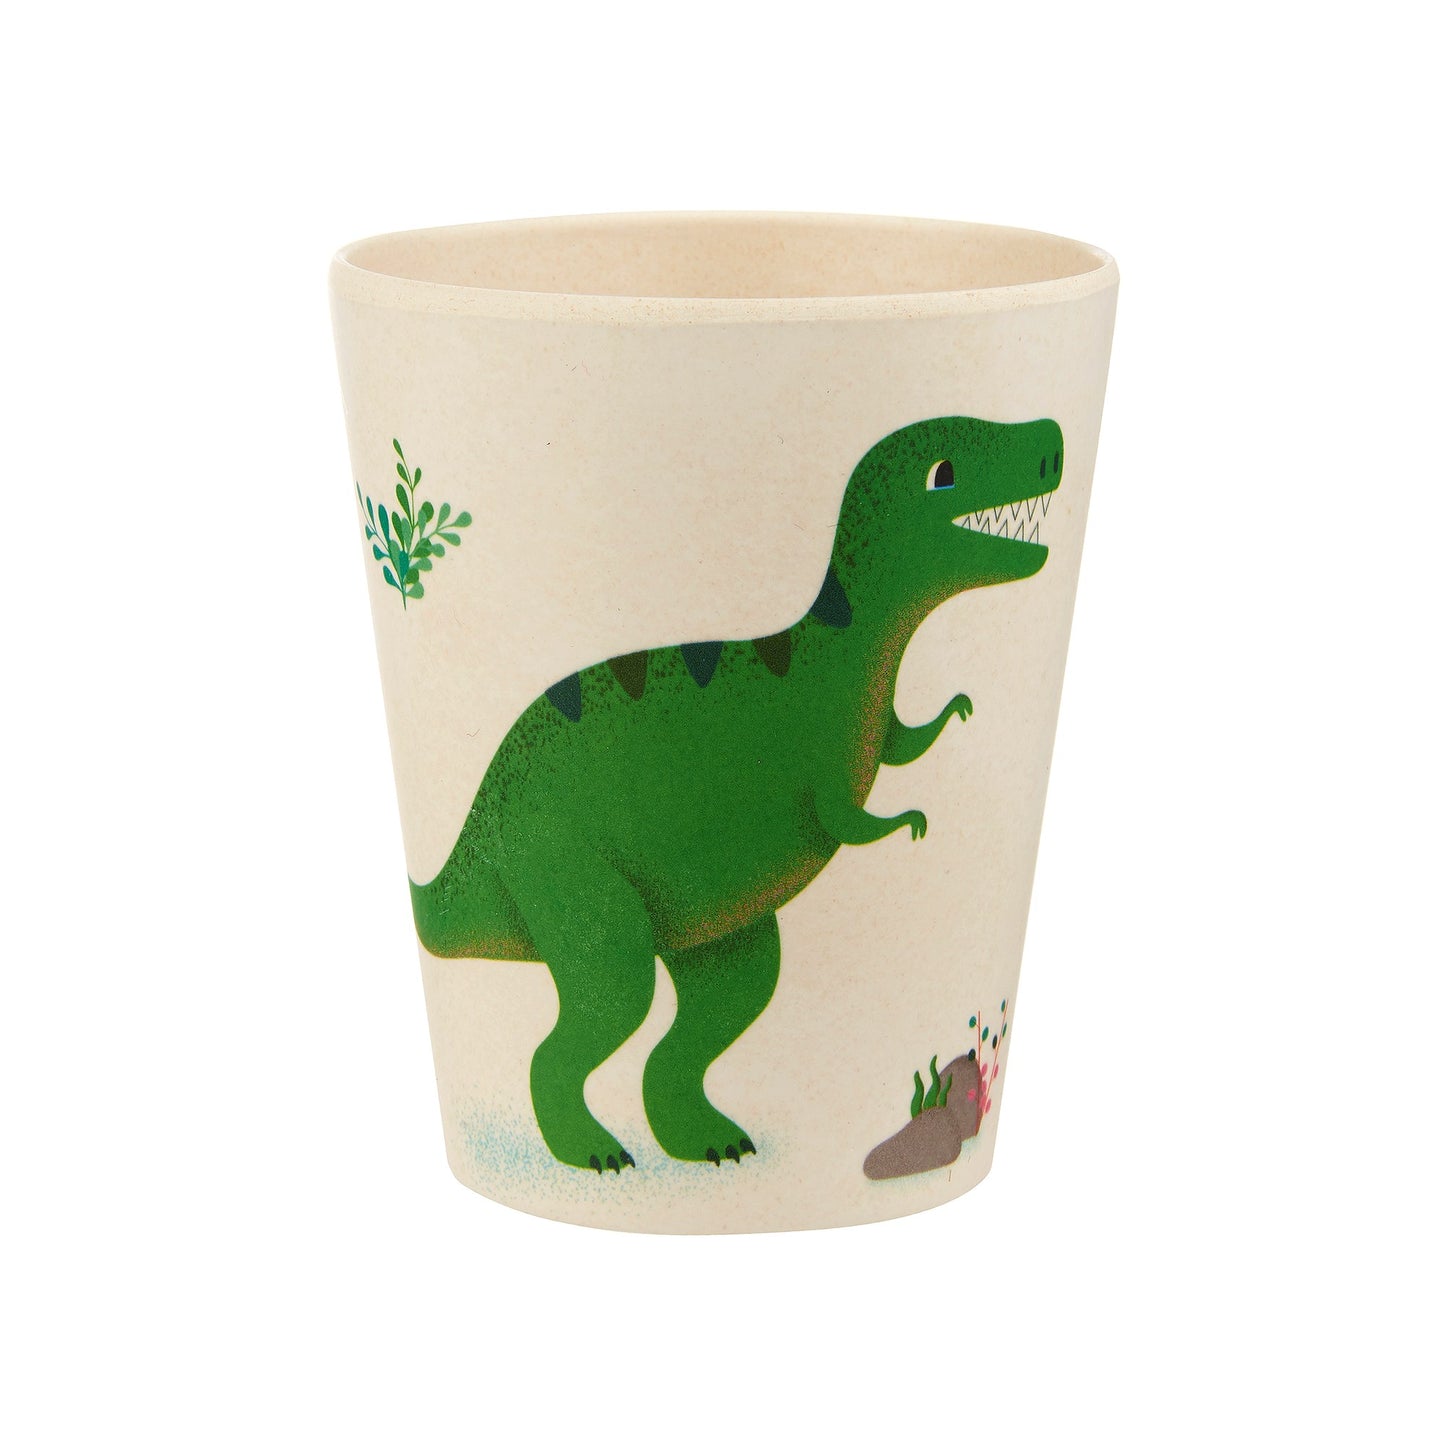 Totally 'roarsome' tableware and cutlery set featuring fun dinosaurs in a multicoloured design.